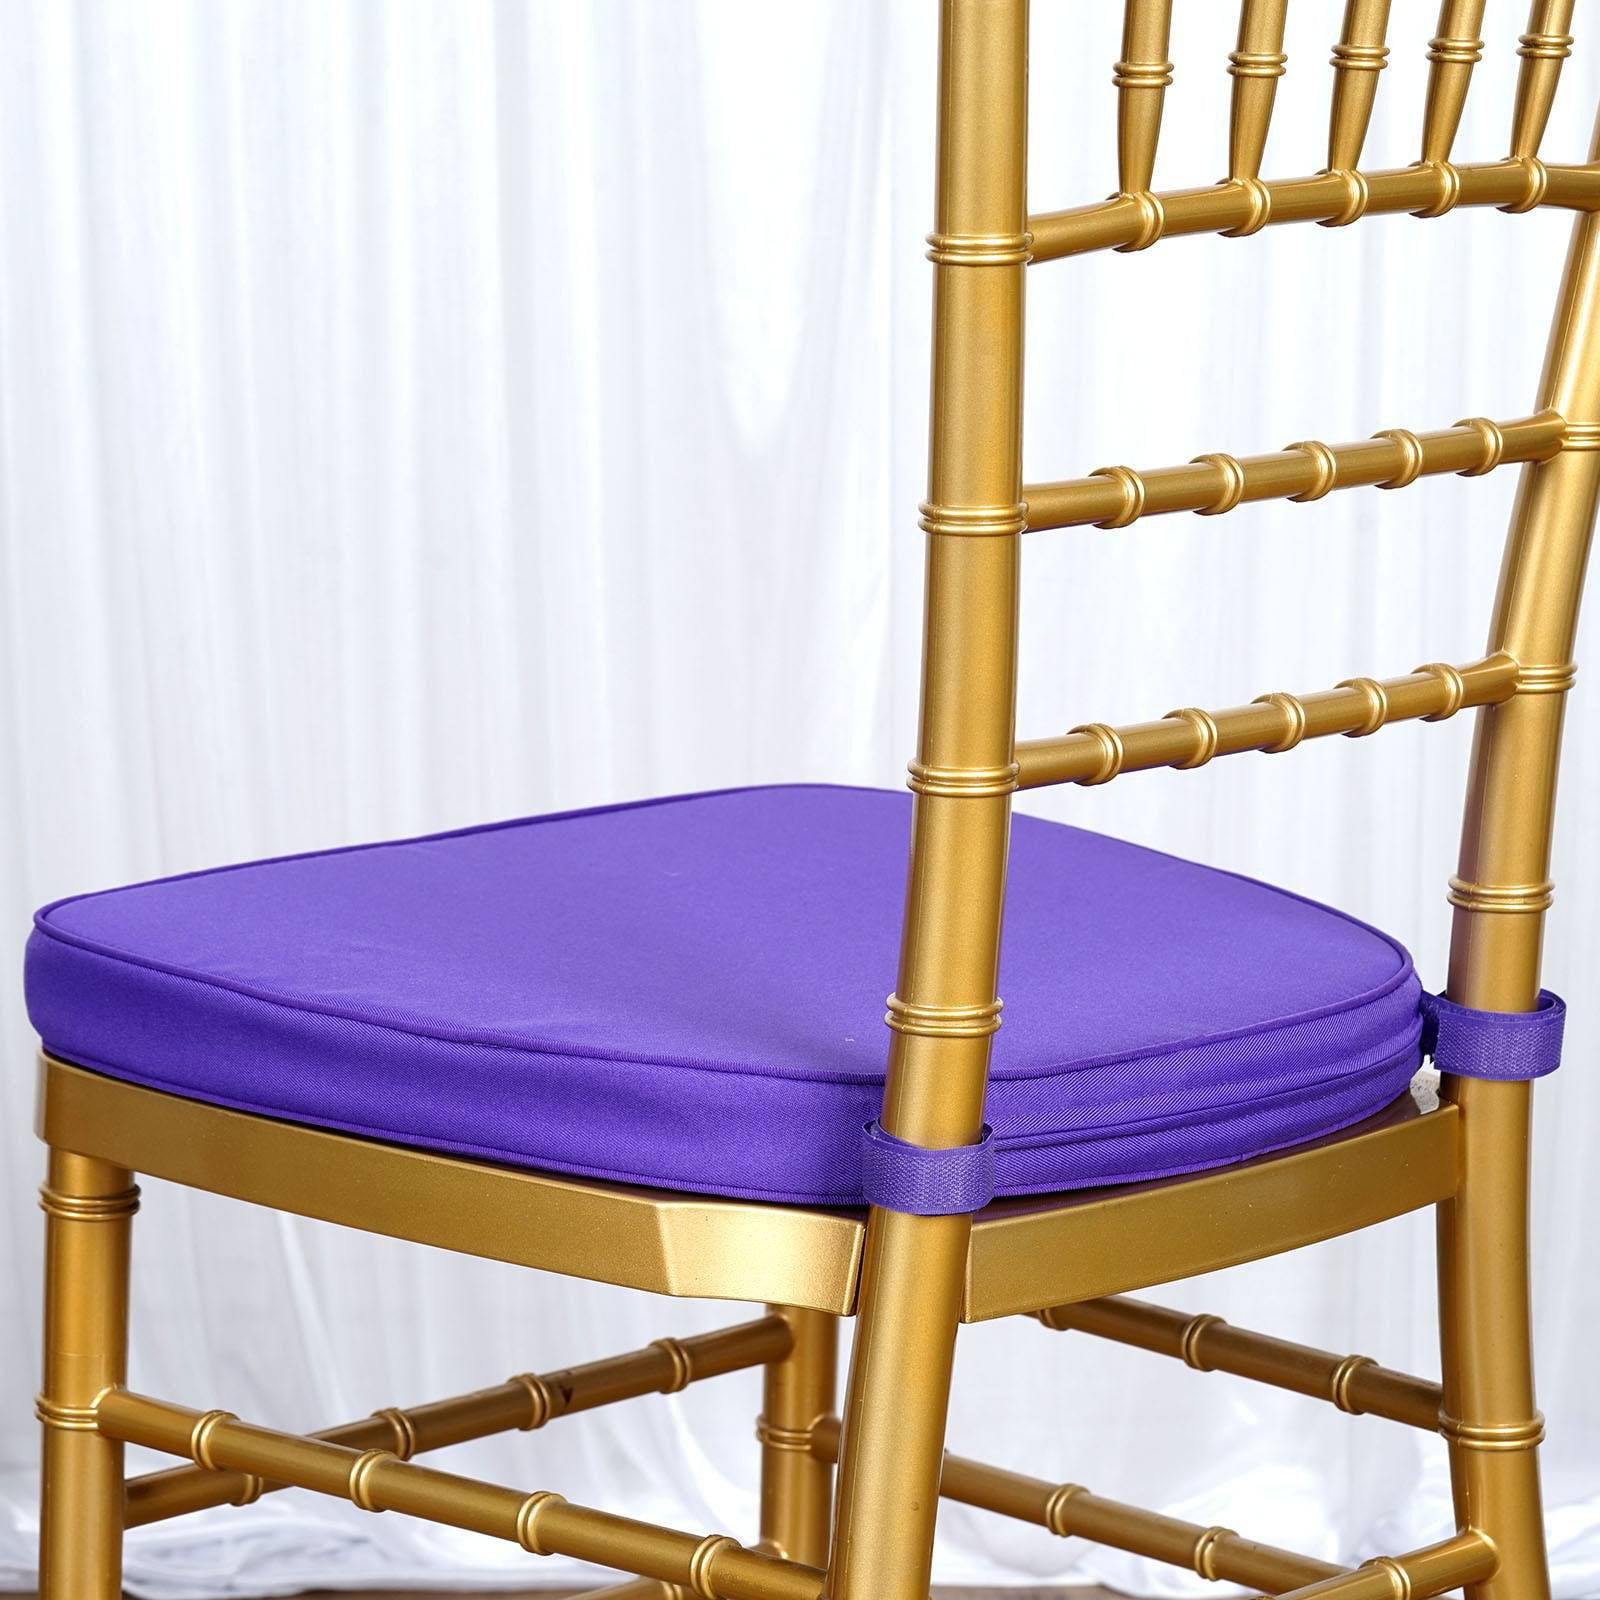 Efavormart Purple Chiavari Chair Cushion Chair Pad with Attachment Straps Party Event Decoration 2 Thick 